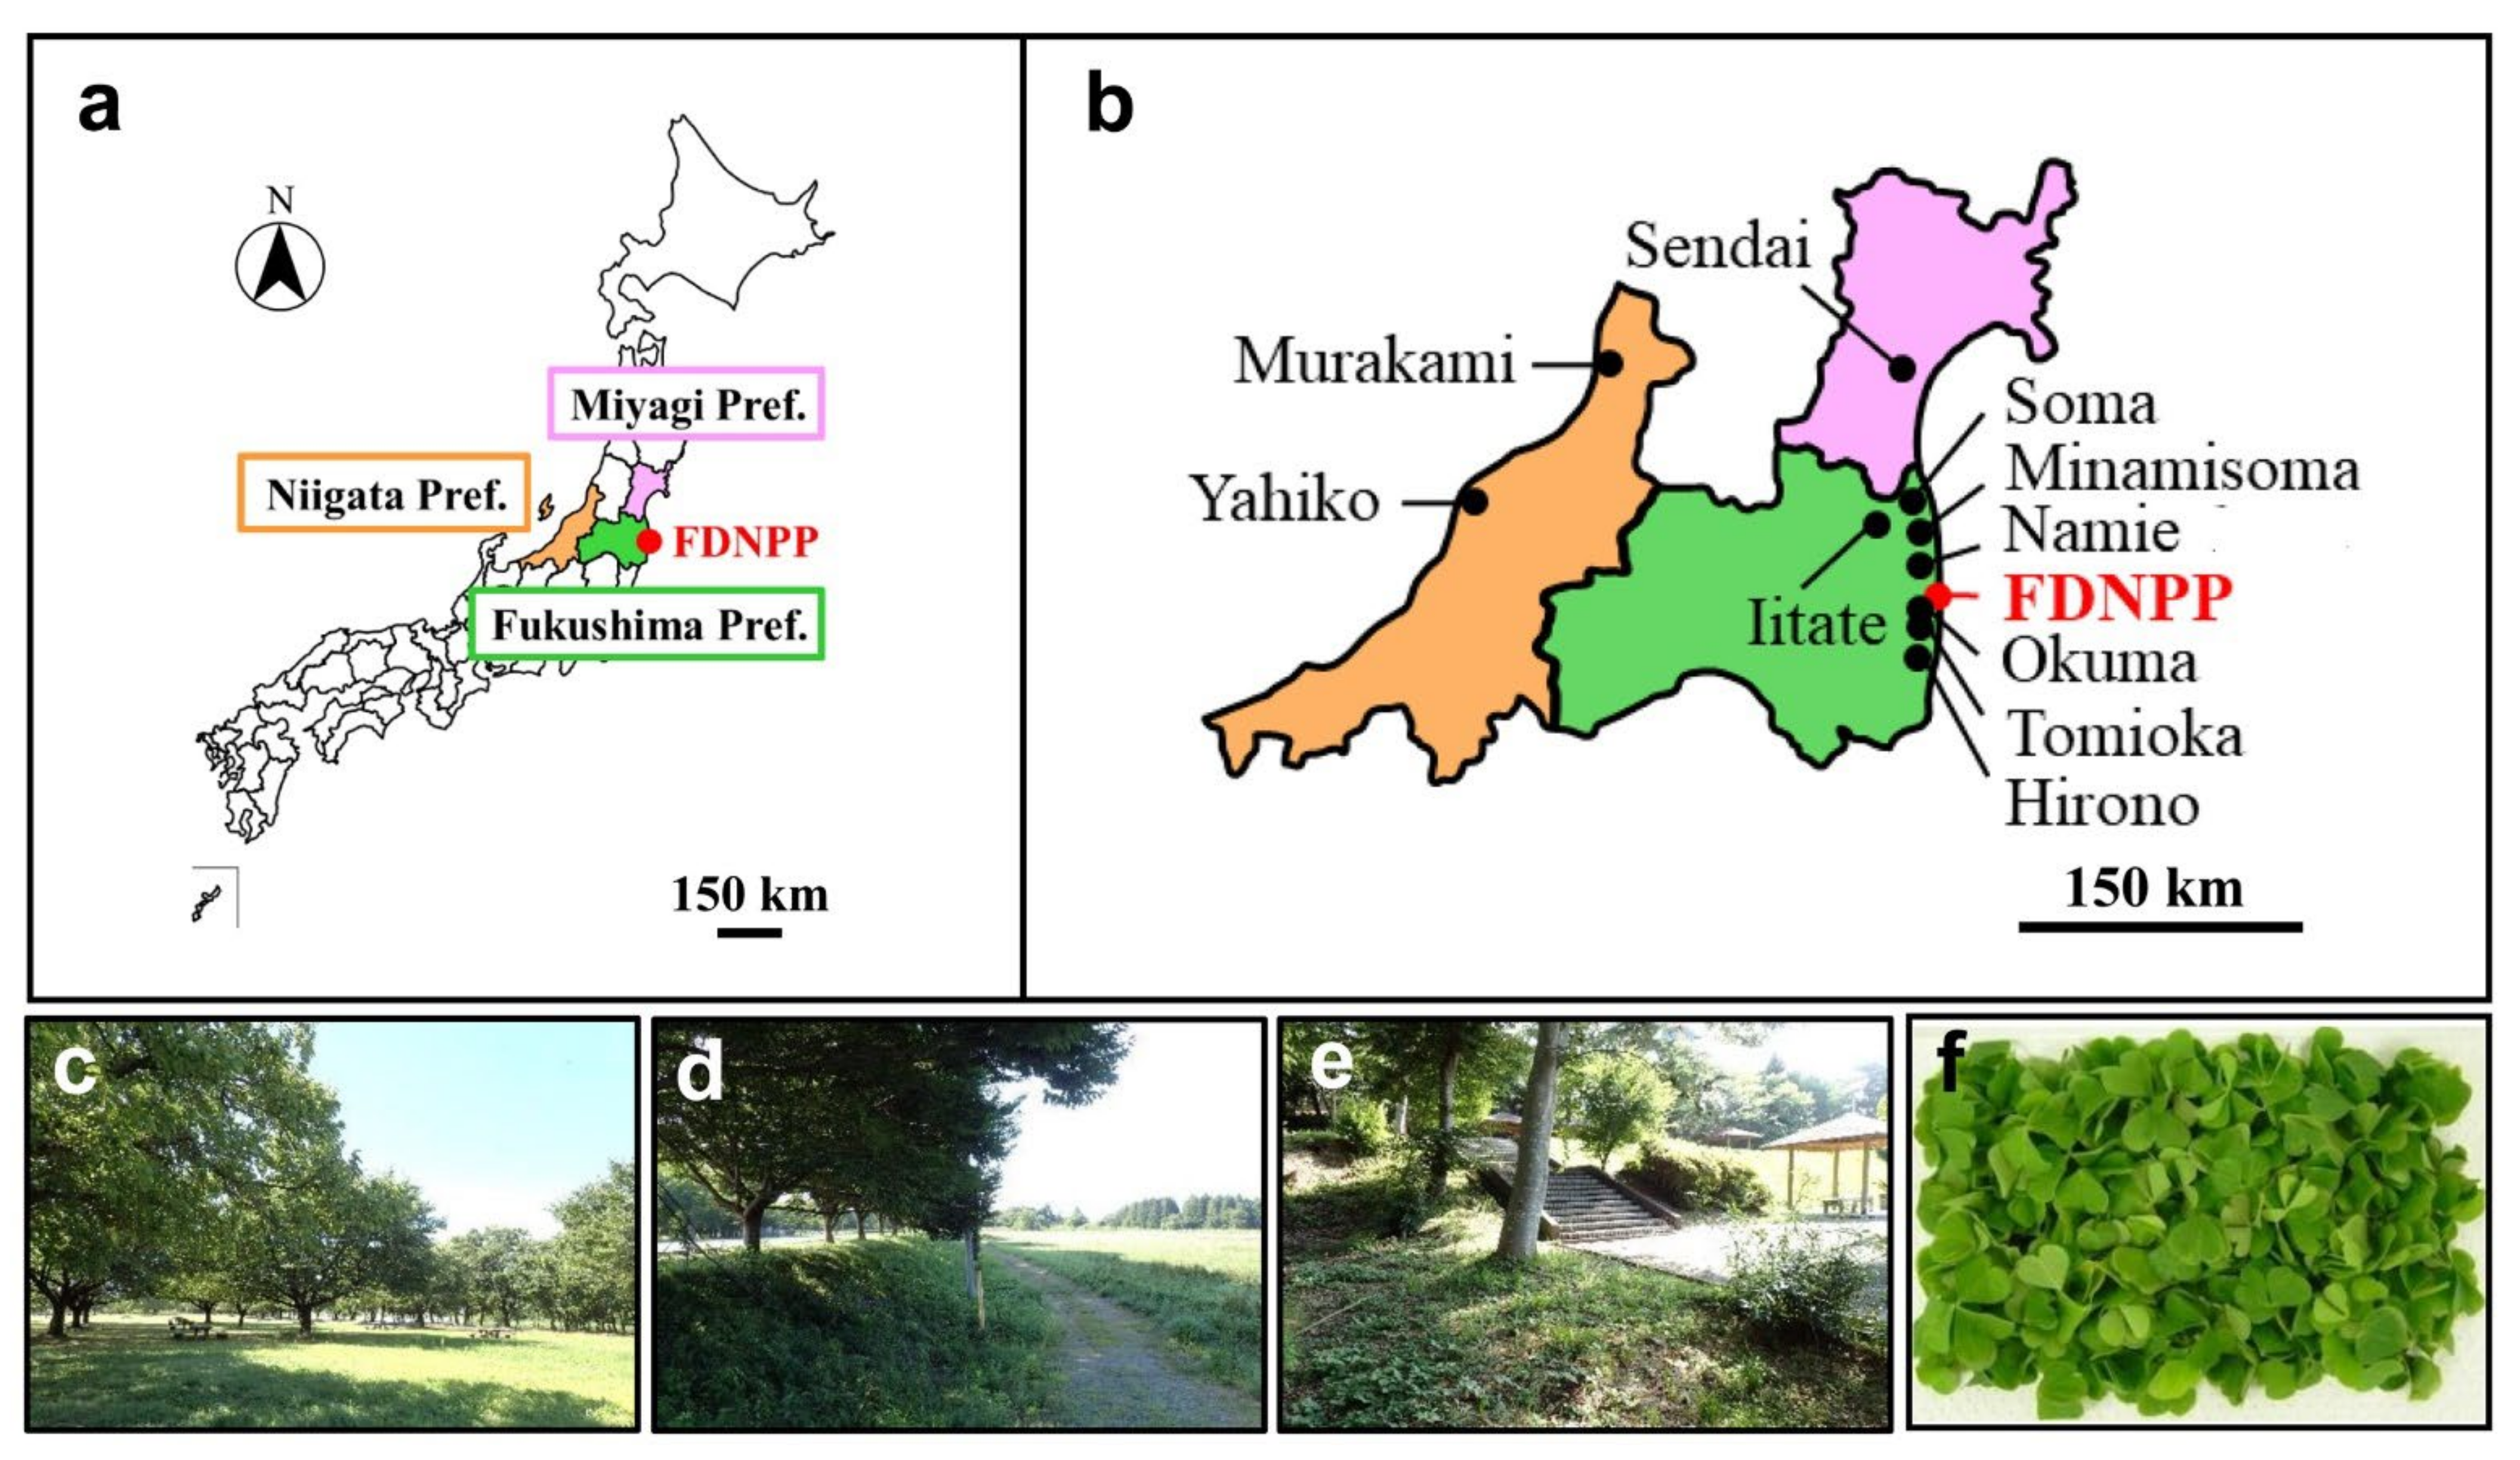 Life | Free Full-Text | Metabolomic Profiles of the Creeping Wood Sorrel  Oxalis corniculata in Radioactively Contaminated Fields in Fukushima:  Dose-Dependent Changes in Key Metabolites